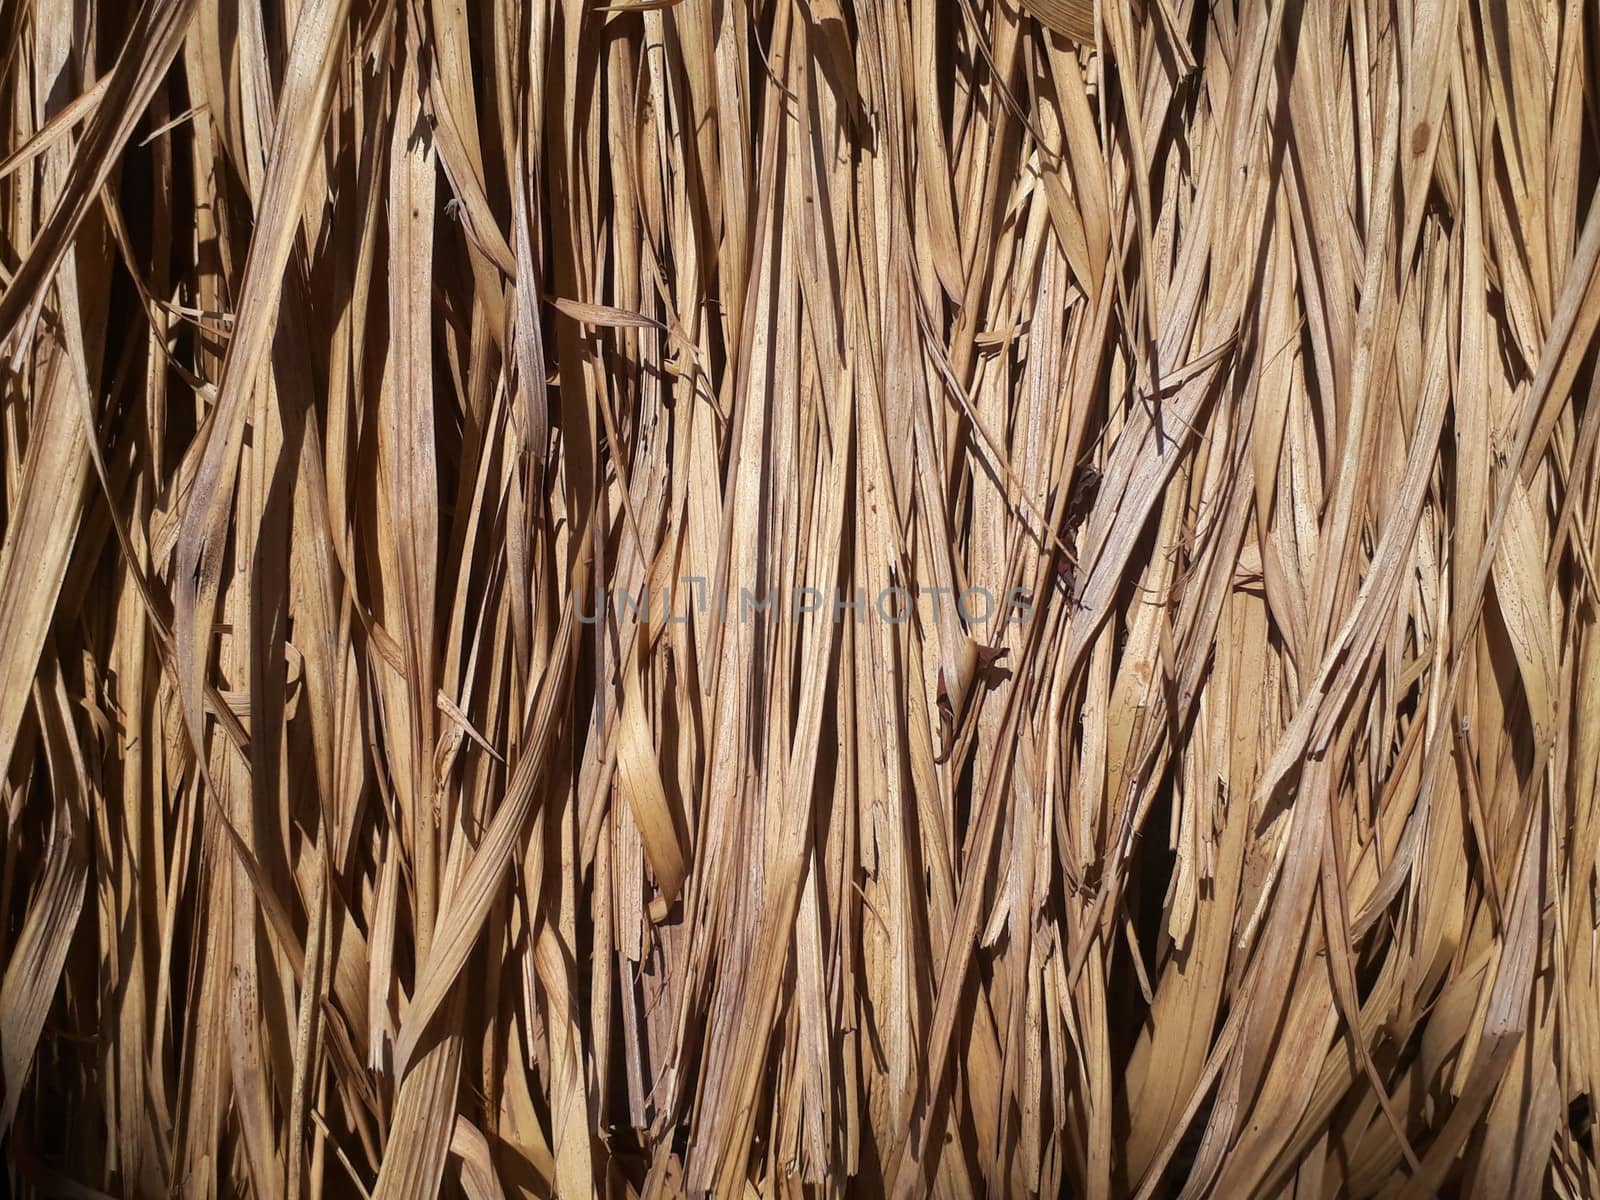 Natural texture background of straw thatch